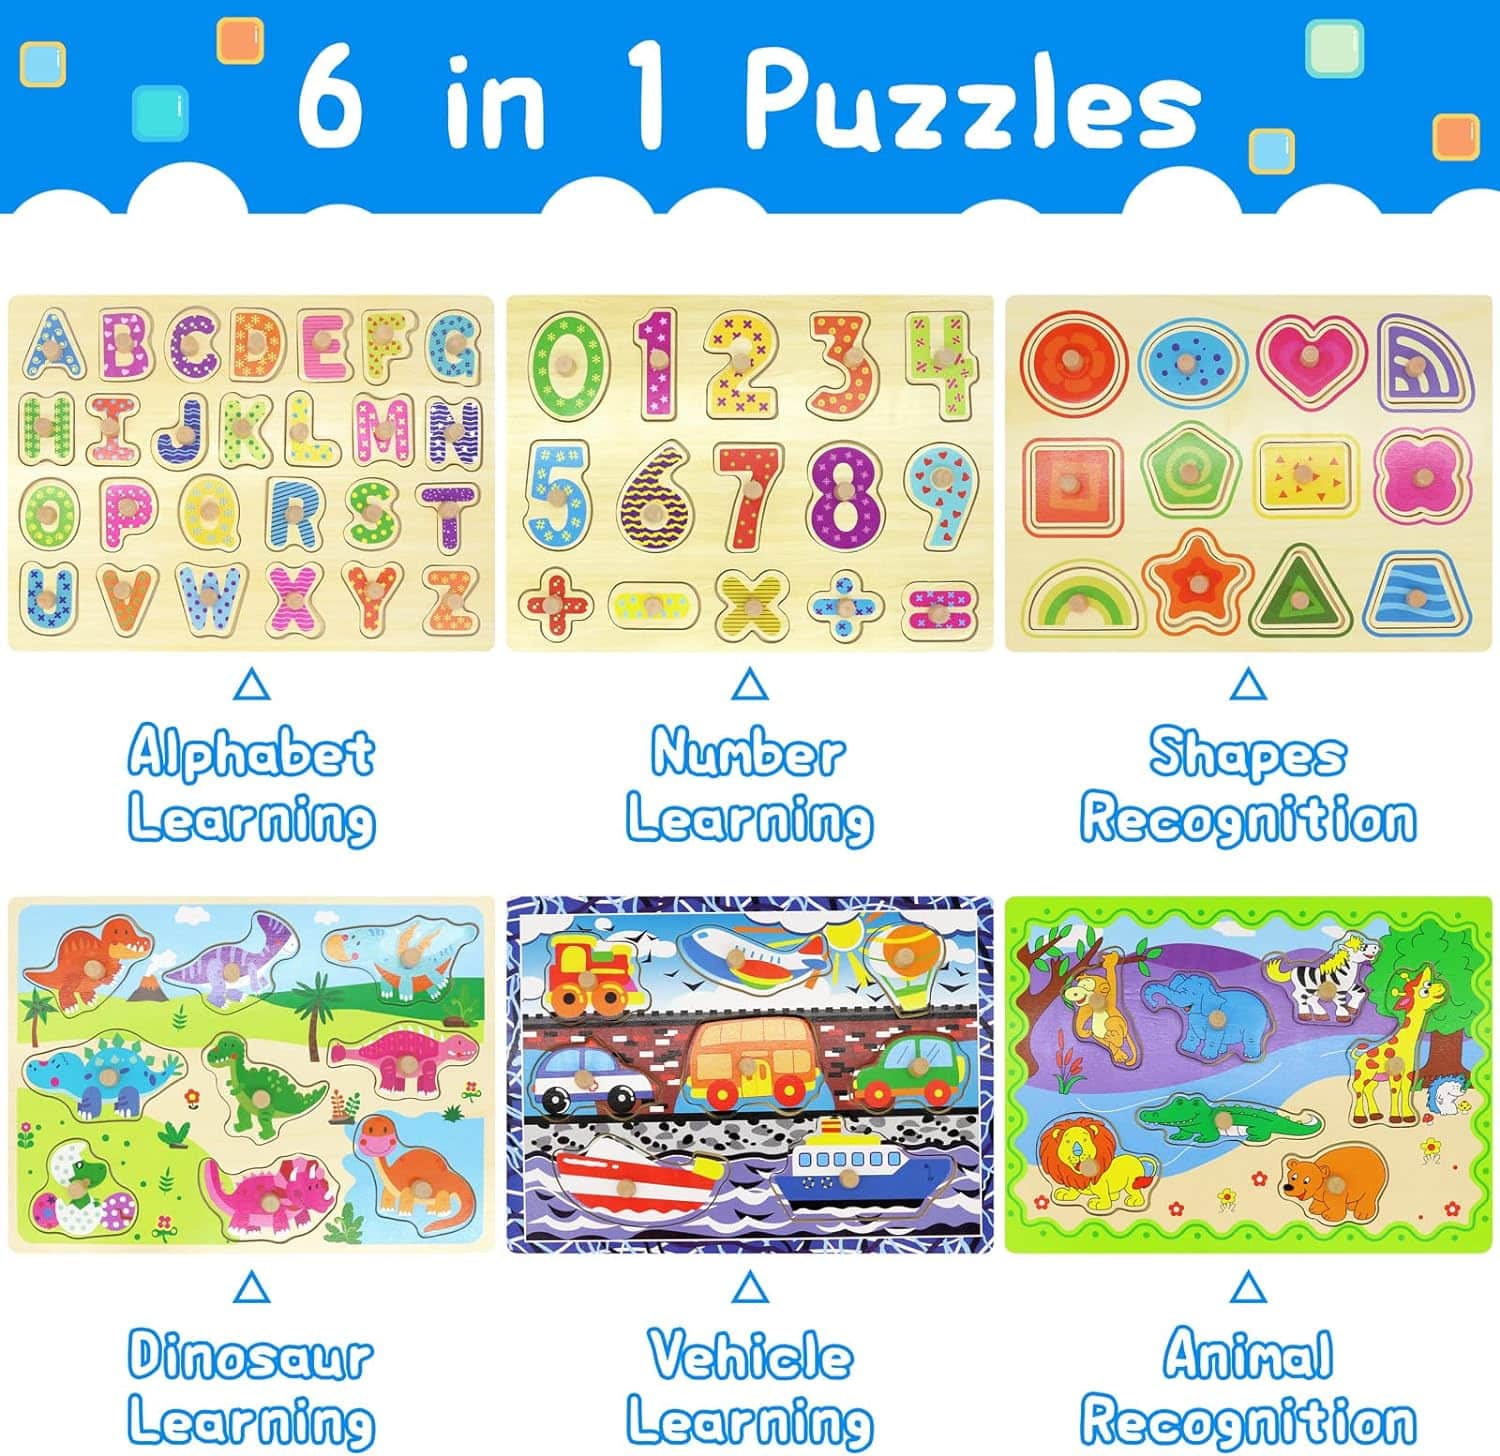 Wooden Puzzles for Toddlers: A Review of JOIWOD Educational Toys